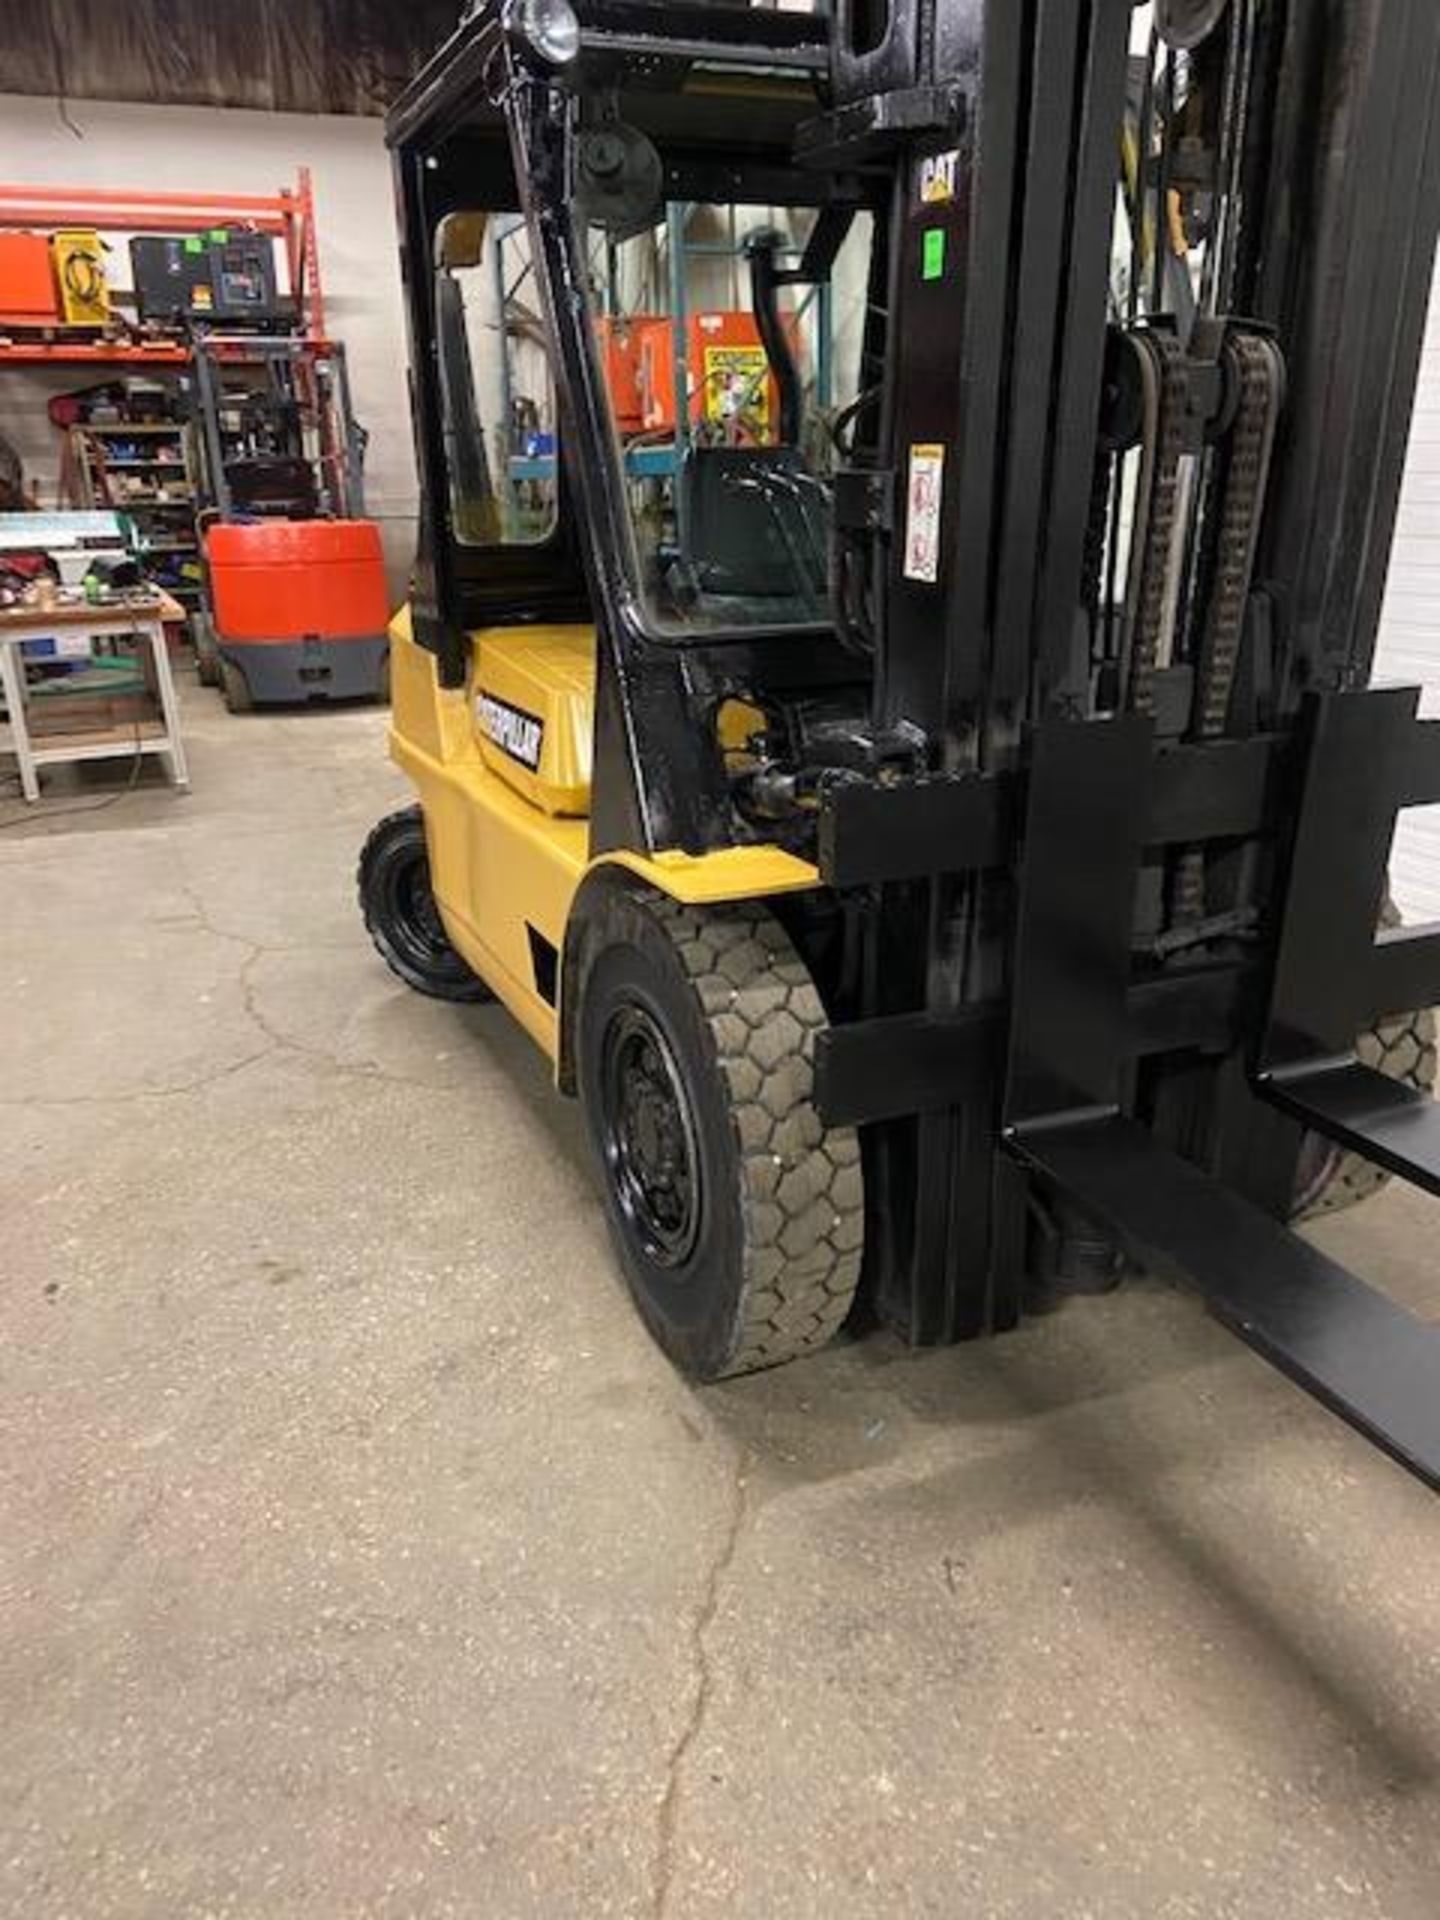 FREE CUSTOMS - Caterpillar 8,000lbs Capacity Diesel OUTDOOR Forklift with 3 stage mast - Image 2 of 3